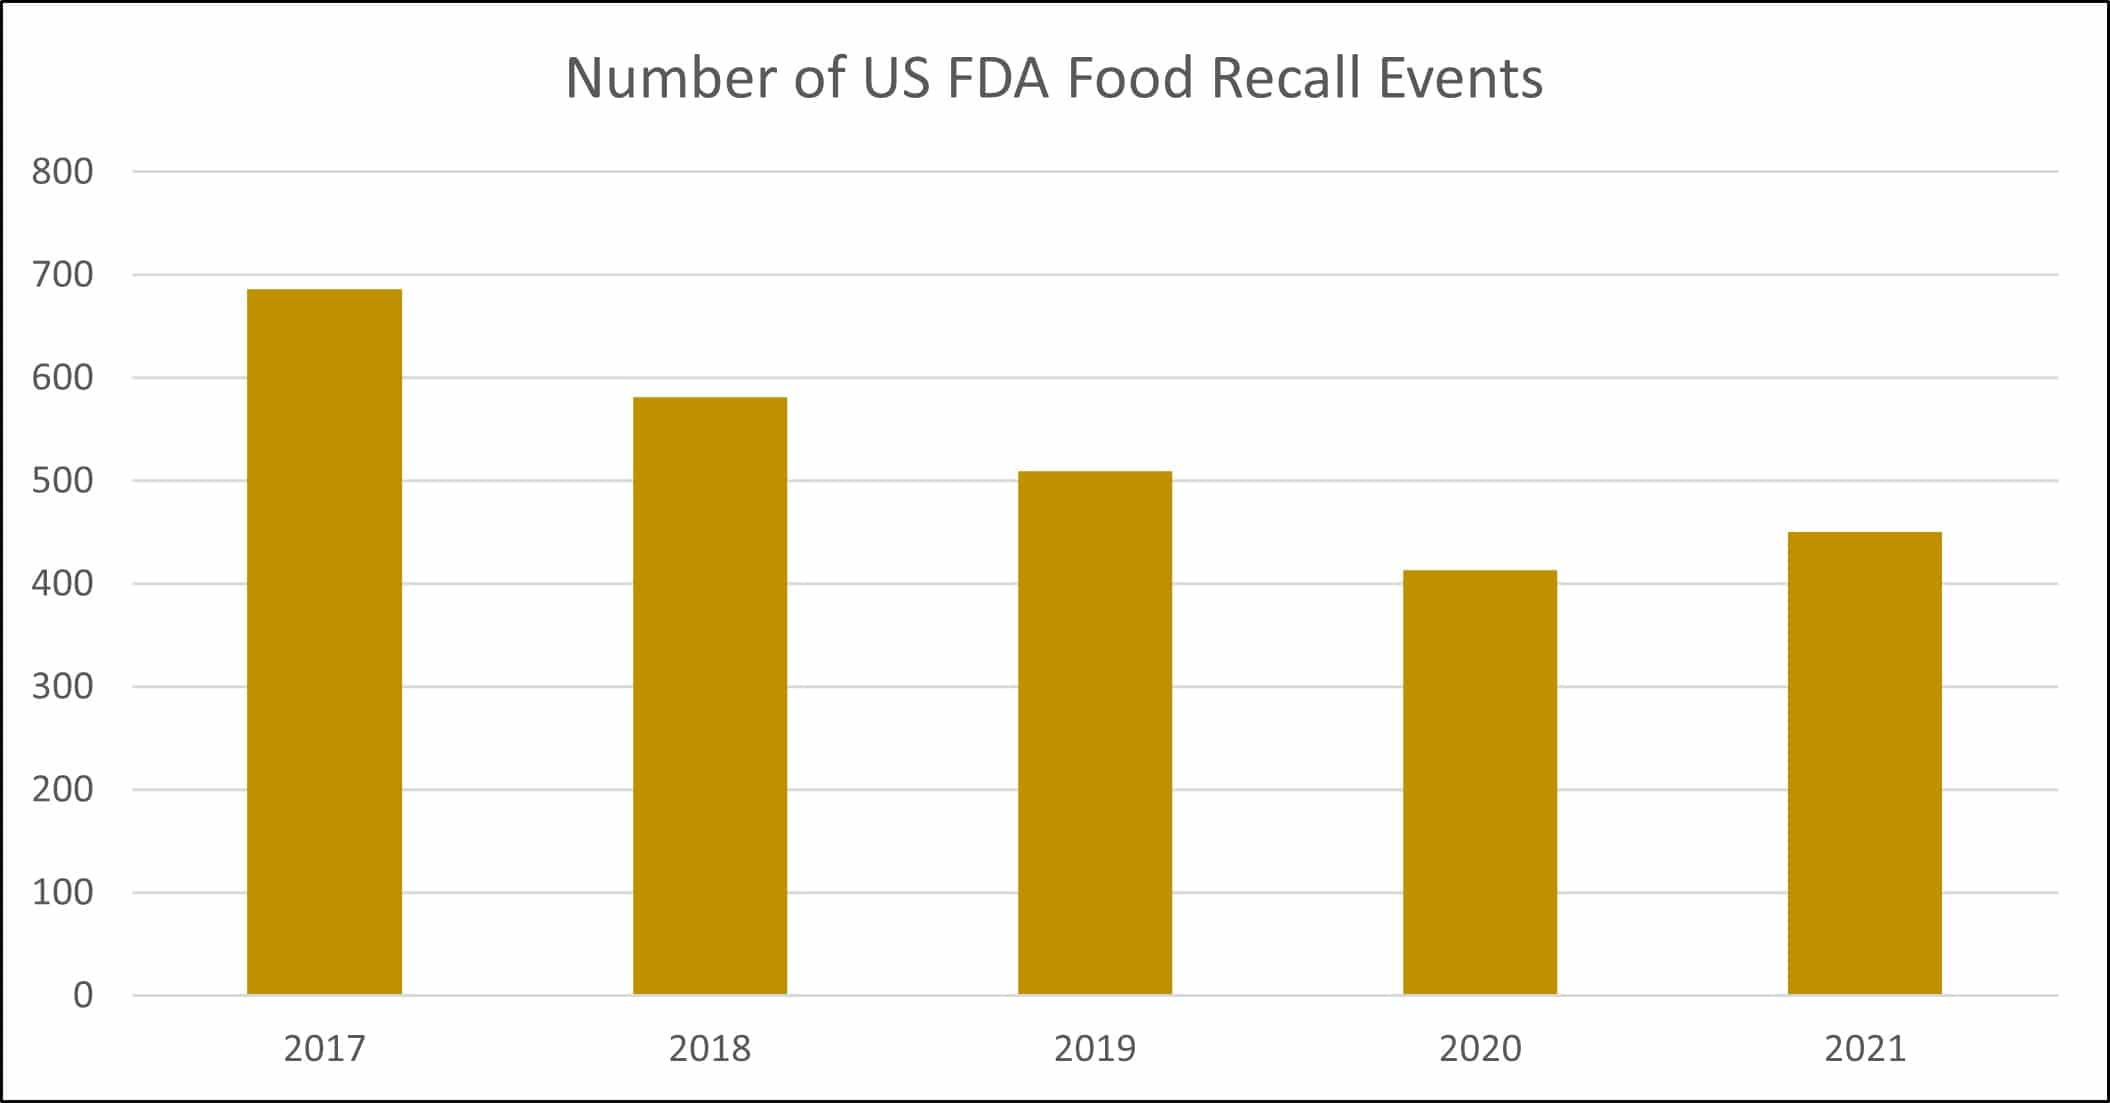 Number of US FDA Food Recall Events